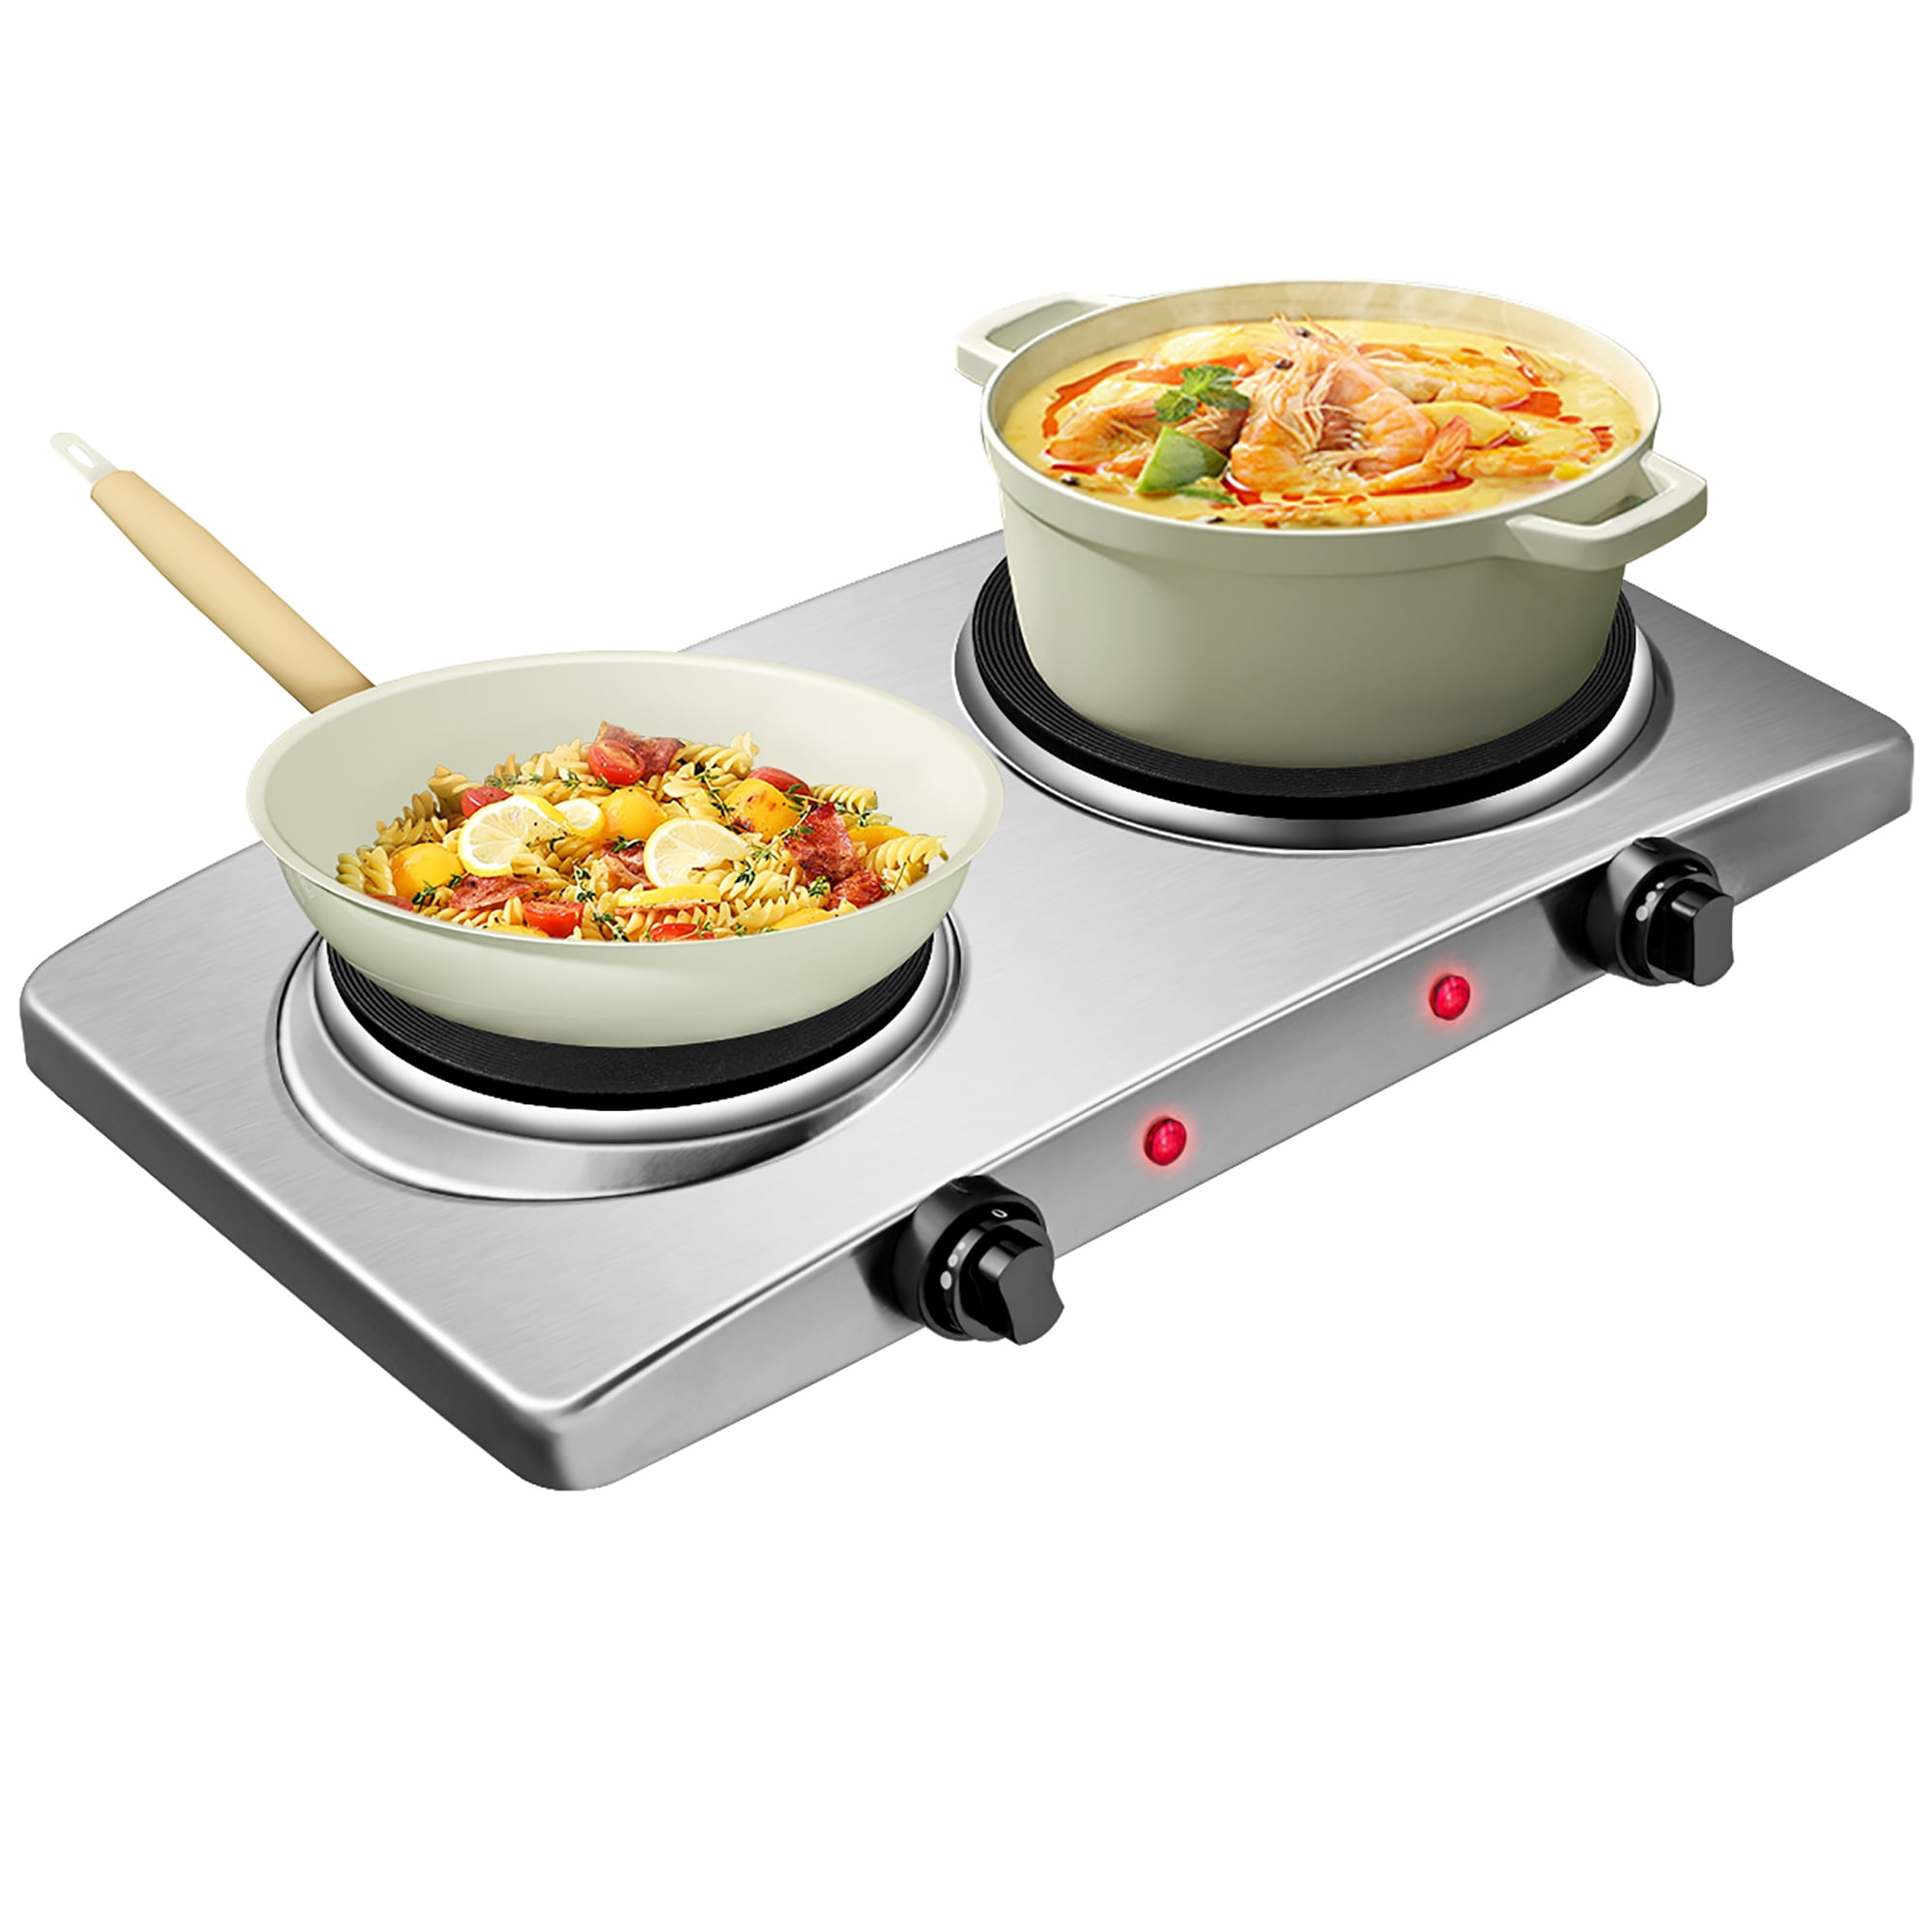 Costway EP24636US 1800W Double Hot Plate Electric Countertop